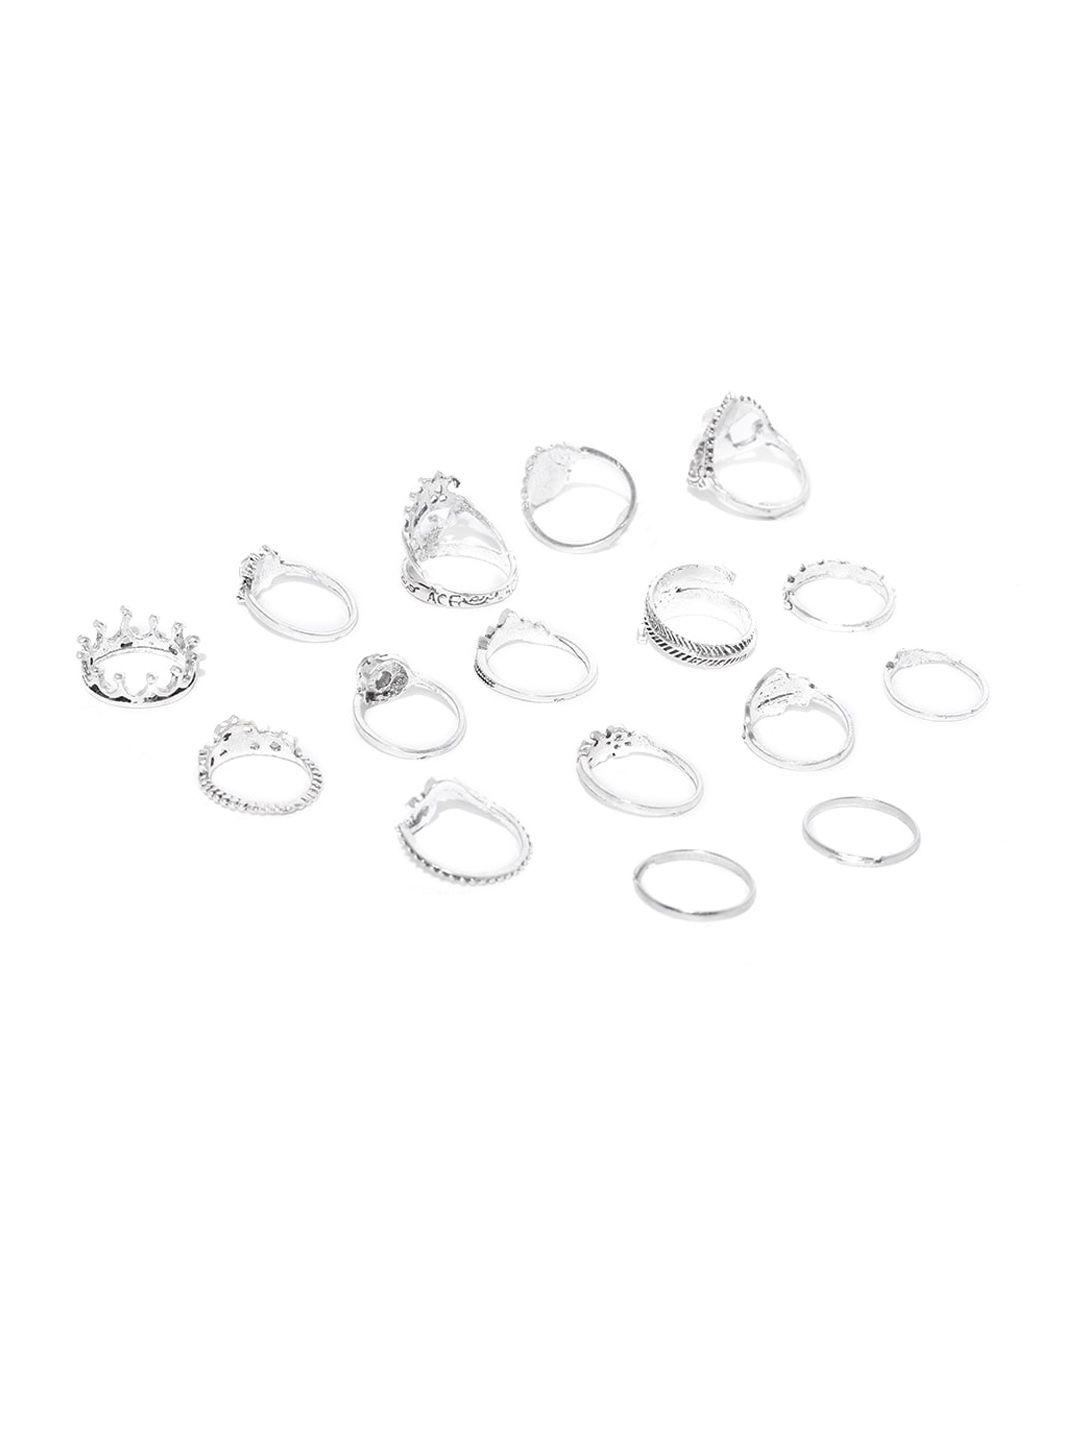 jewels galaxy set of 16 silver-plated oxidized finger rings